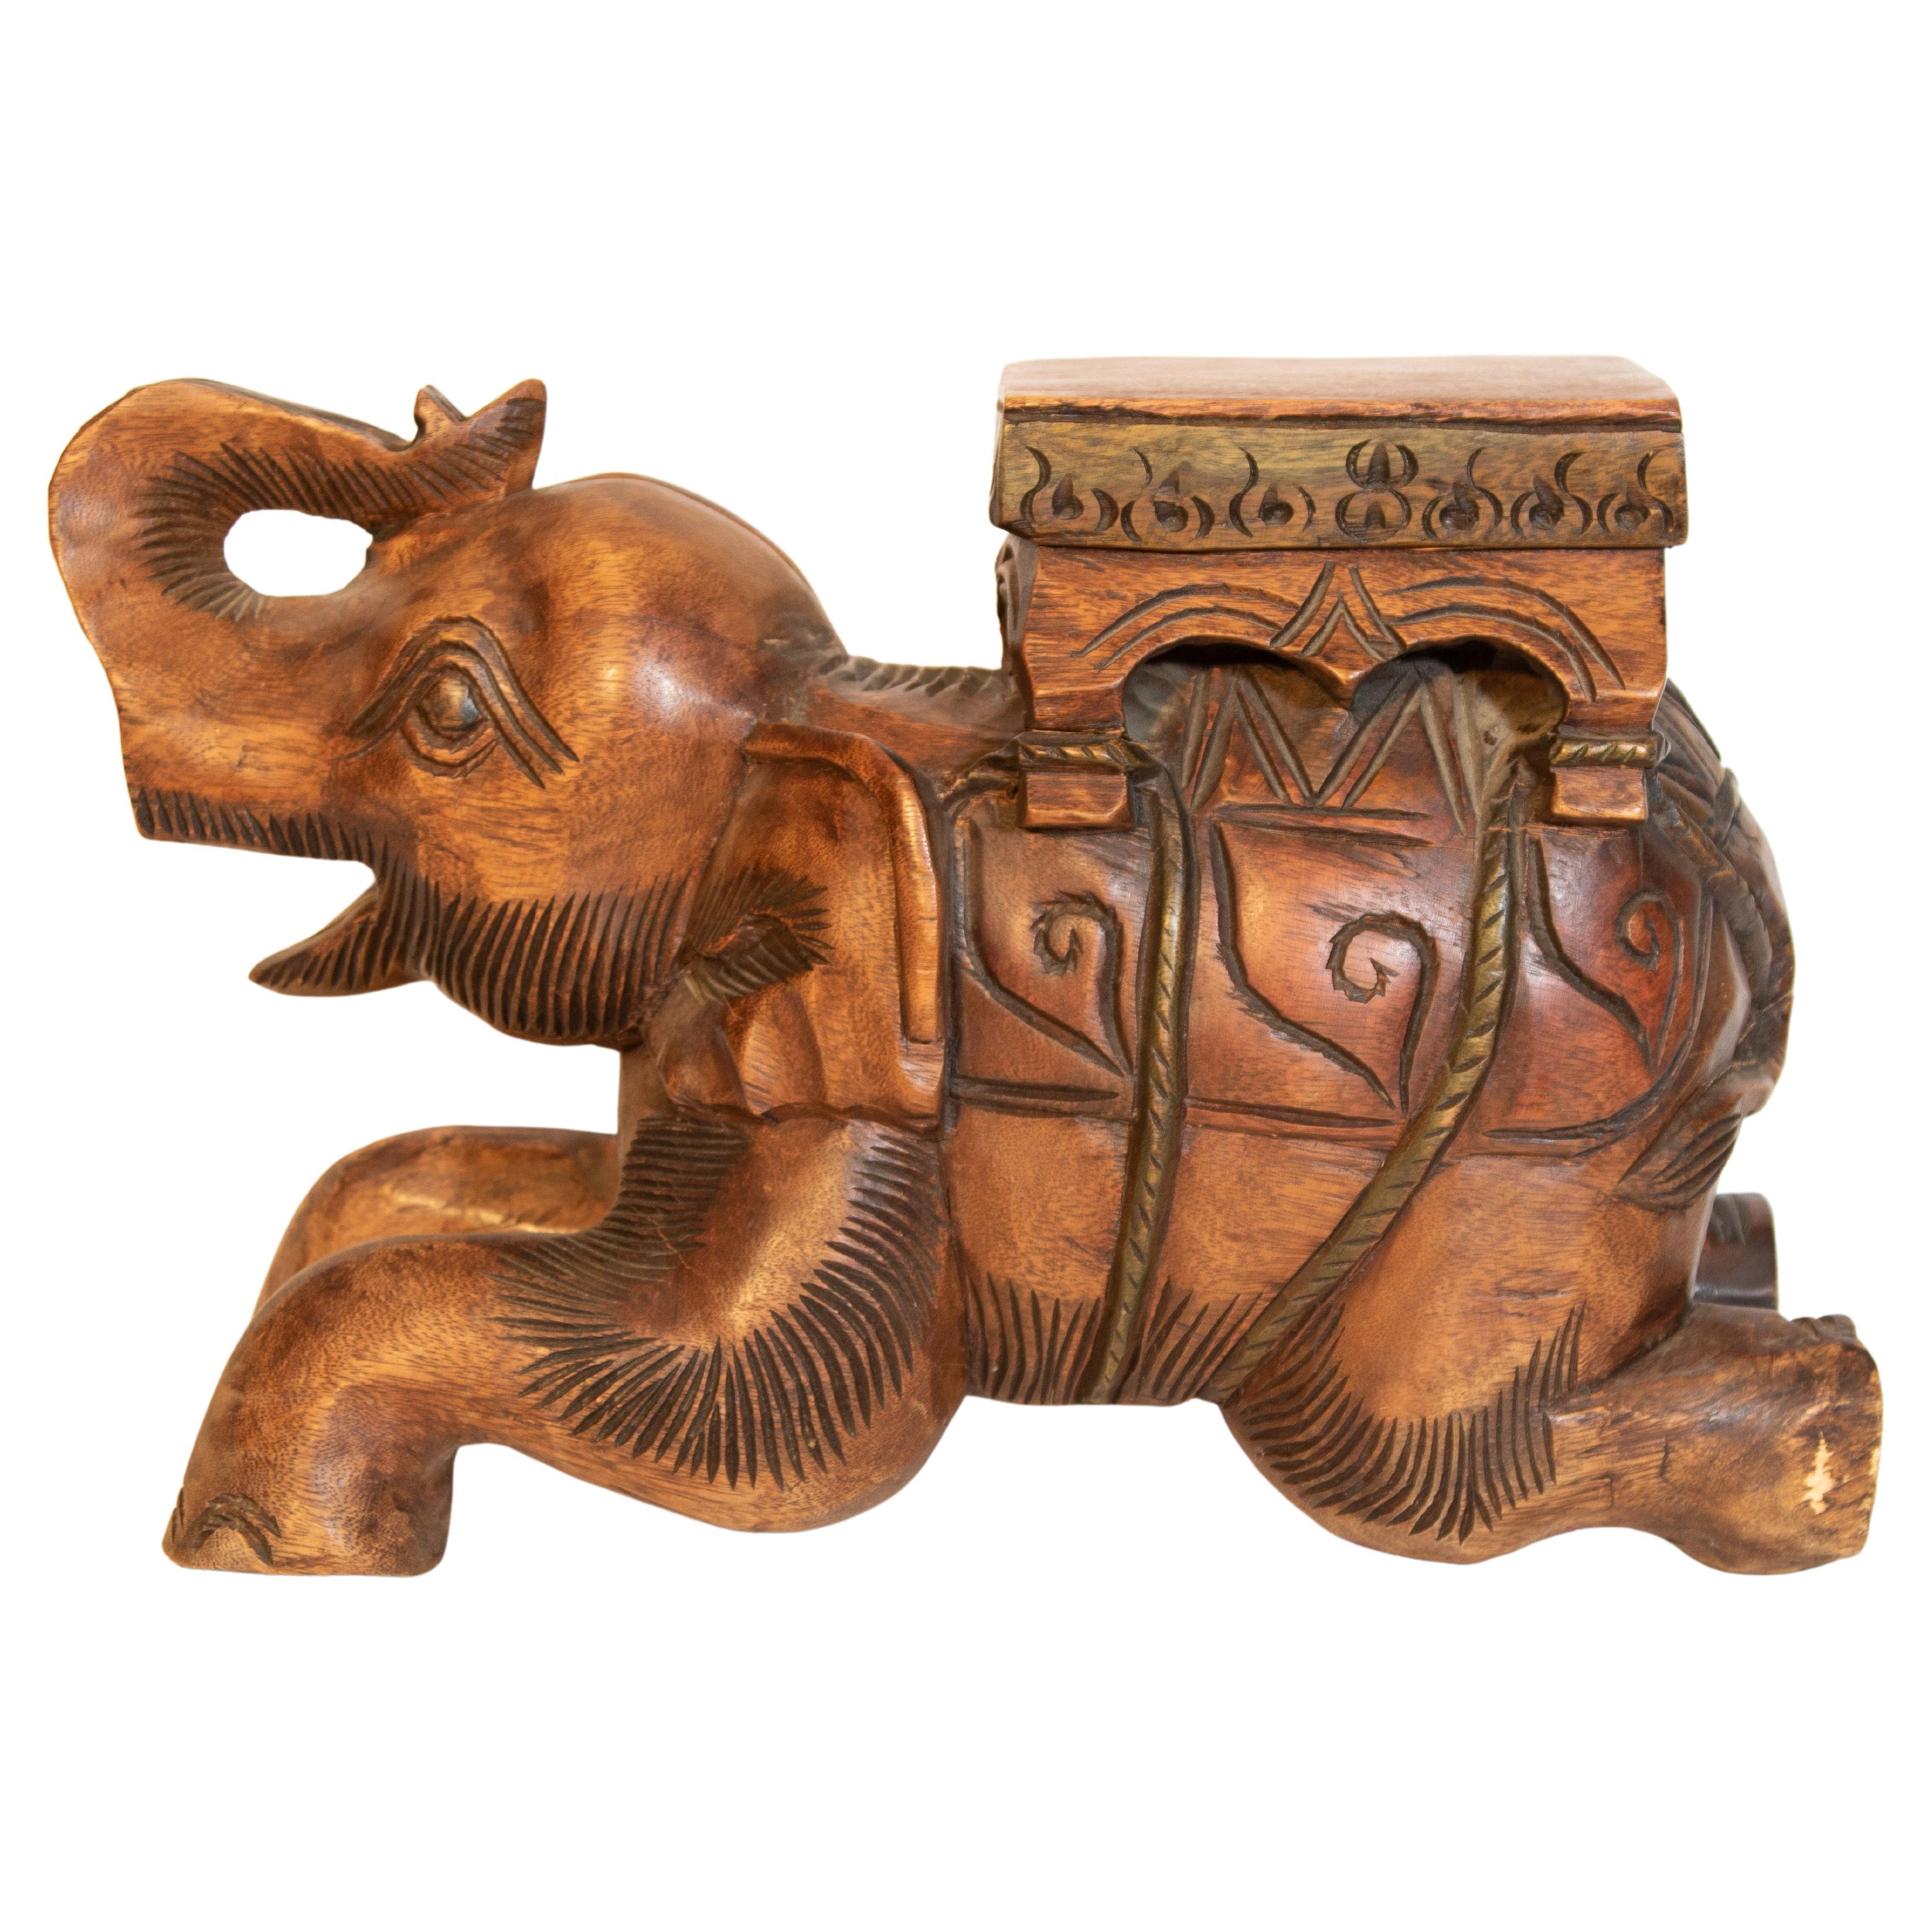 Vintage Asian Elephant Hand-Carved Wooden Stool